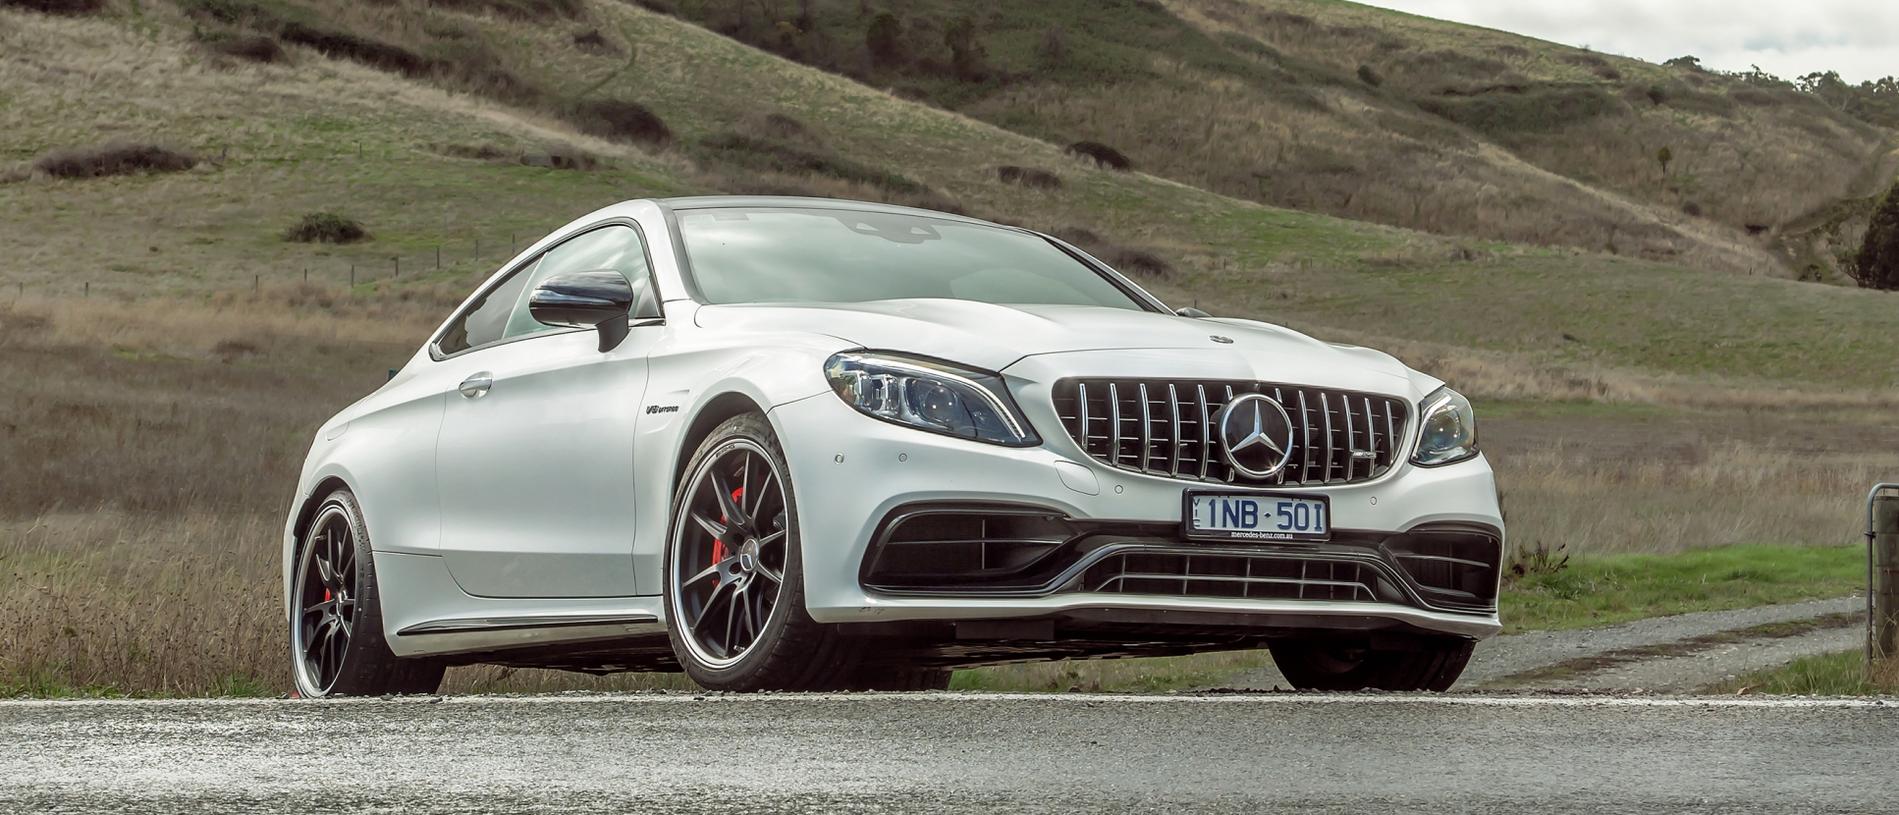 Mercedes-AMG C63 S Coupe: Looks and sounds great and goes harder than rivals